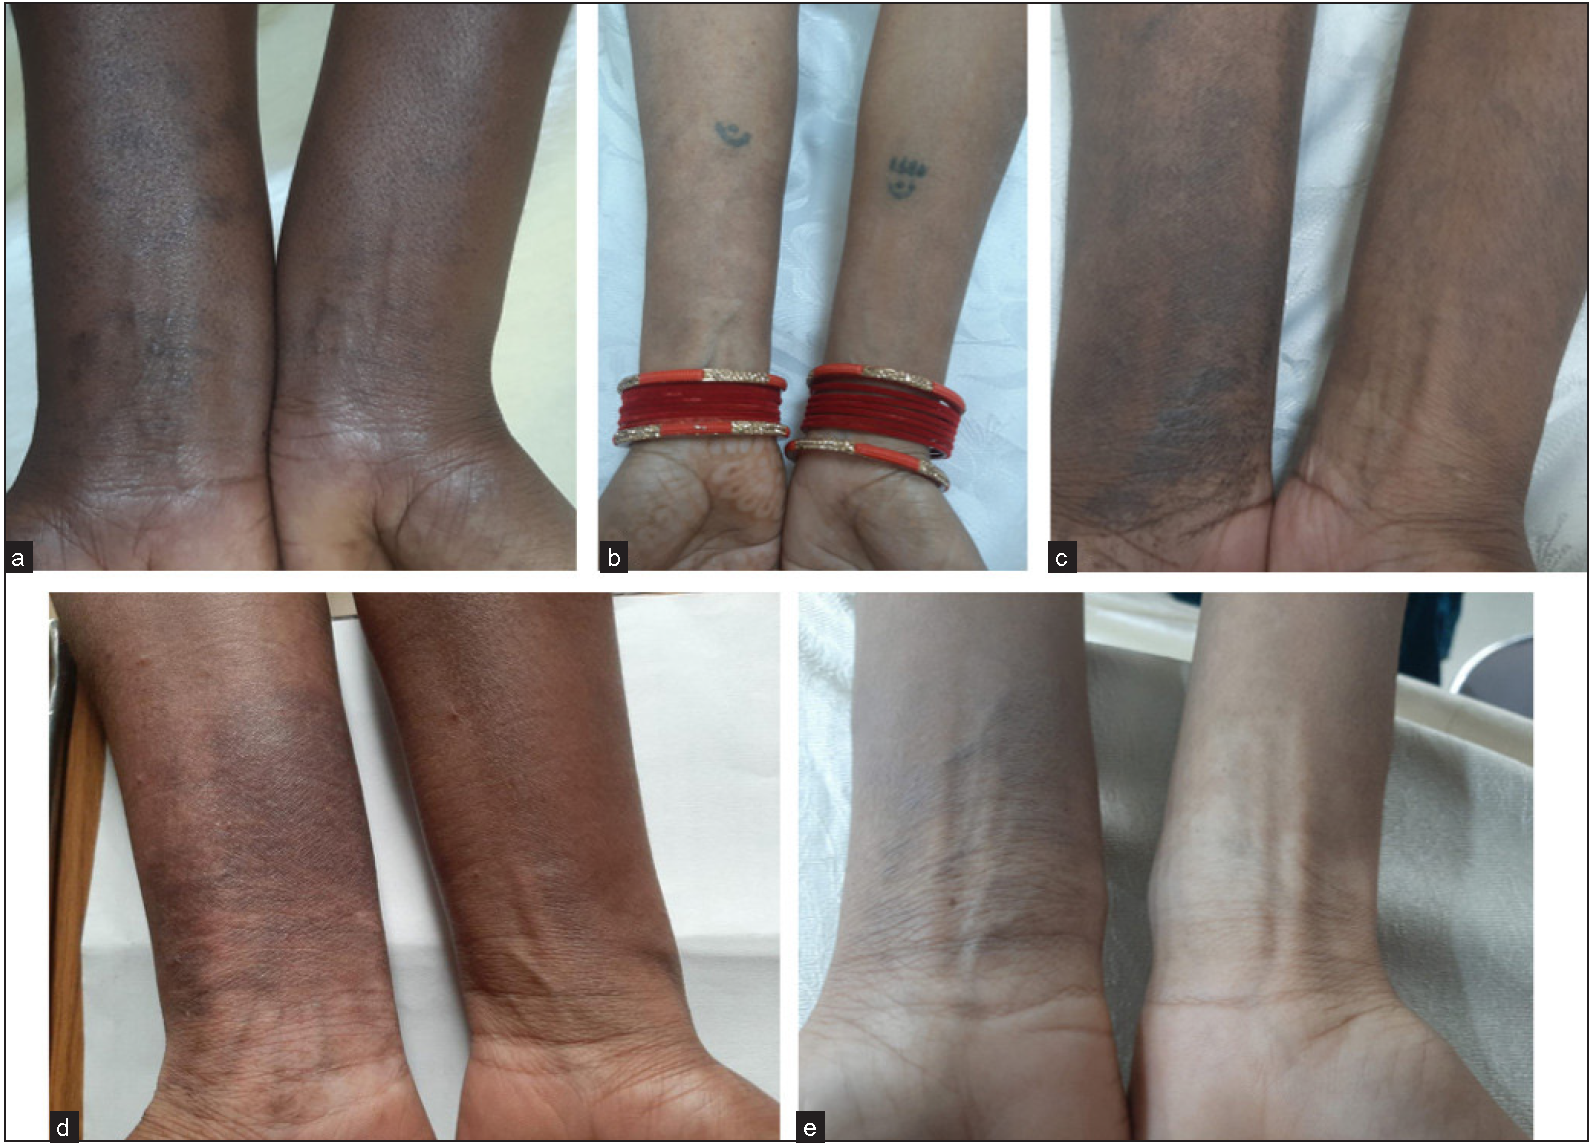 Acquired dermal macular hyperpigmentation secondary to bangles – an unusual encounter